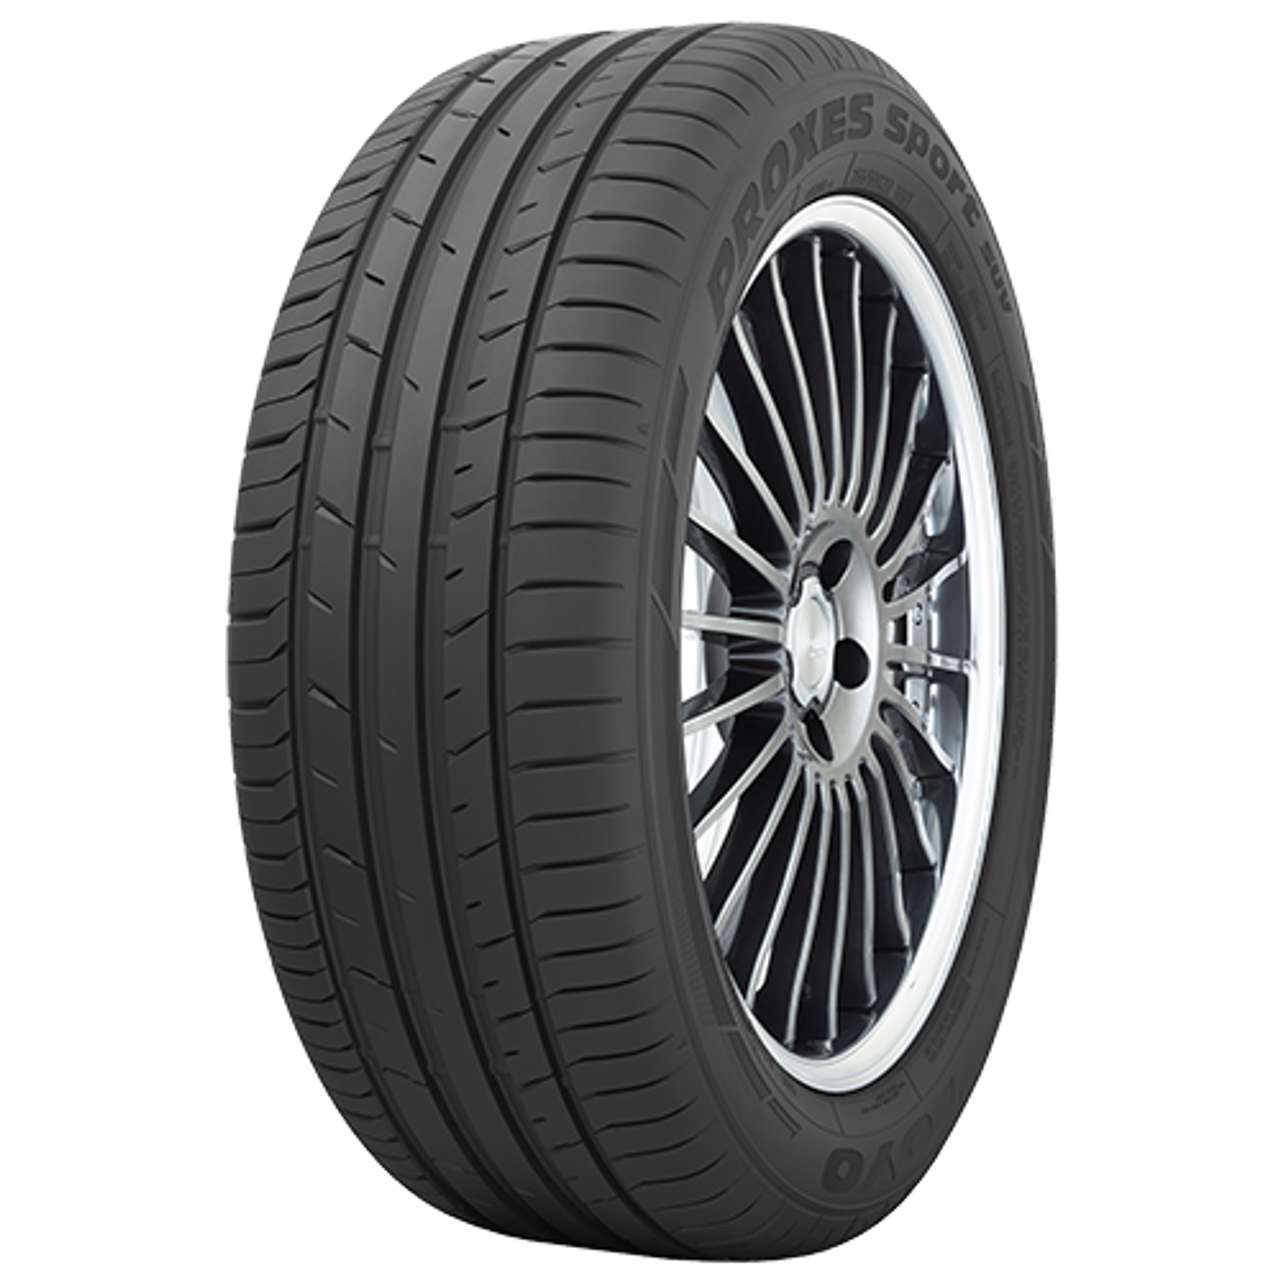 TOYO PROXES SPORT SUV 225/55R19 99V BSW